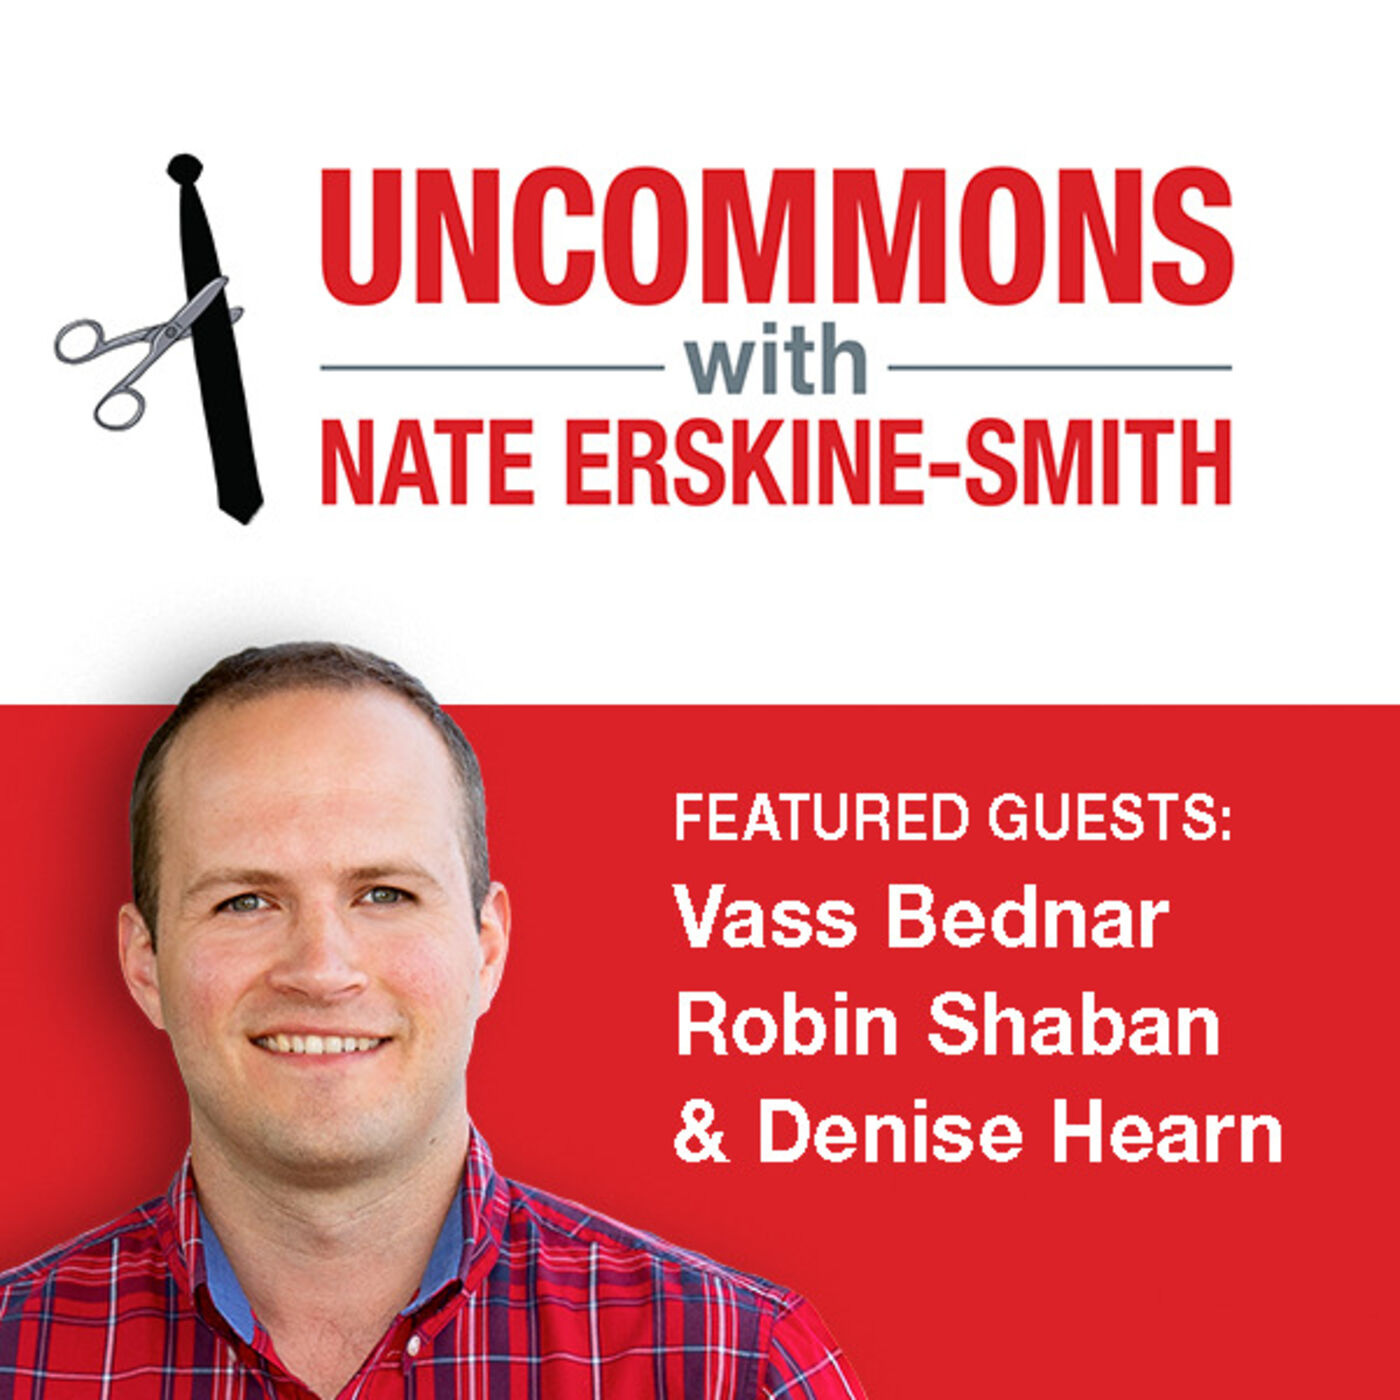 Competition reform with Vass Bednar, Robin Shaban and Denise Hearn